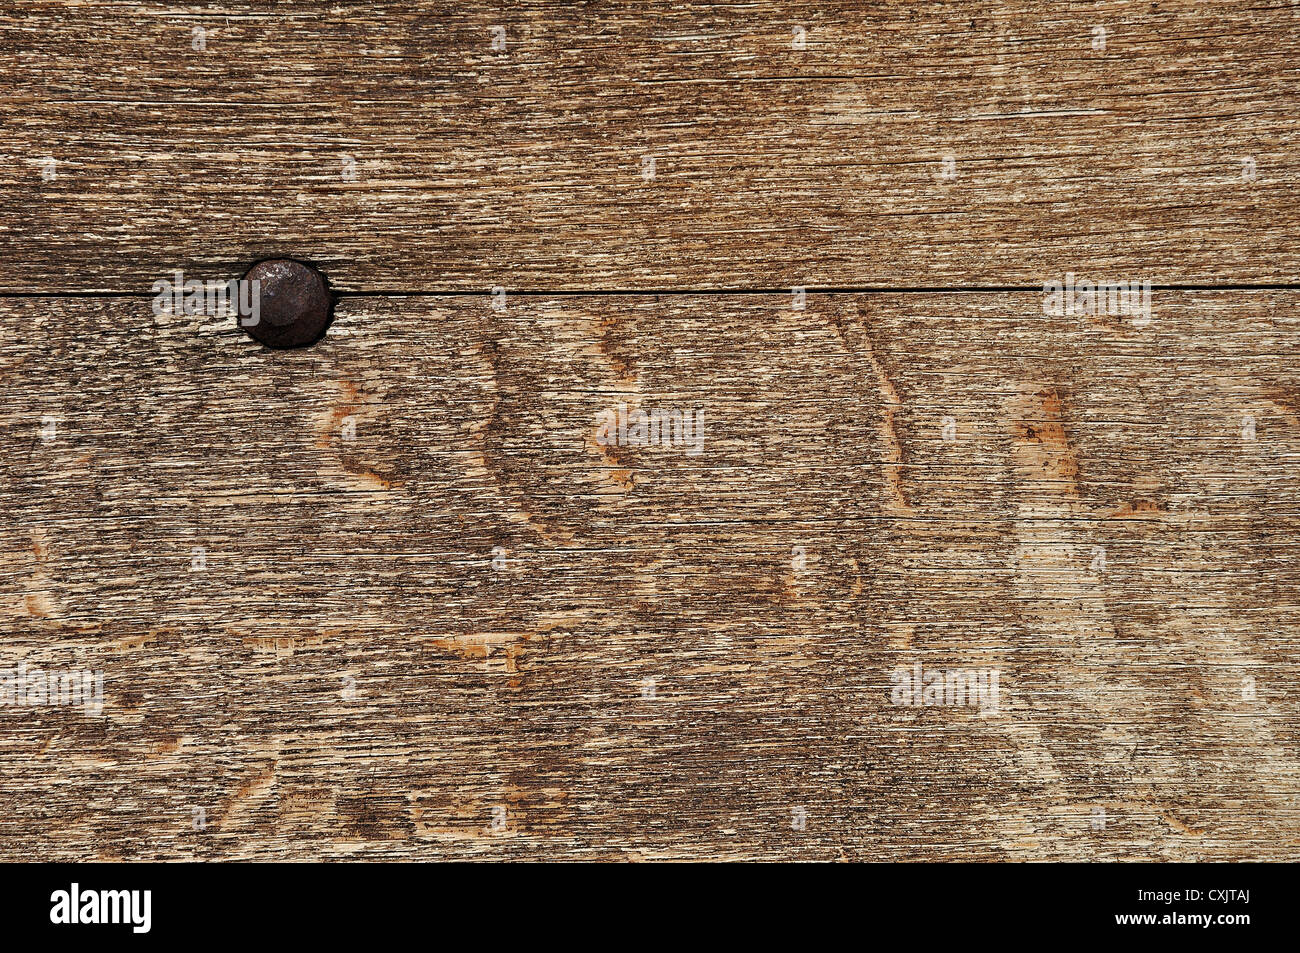 Wooden board with rivet Stock Photo